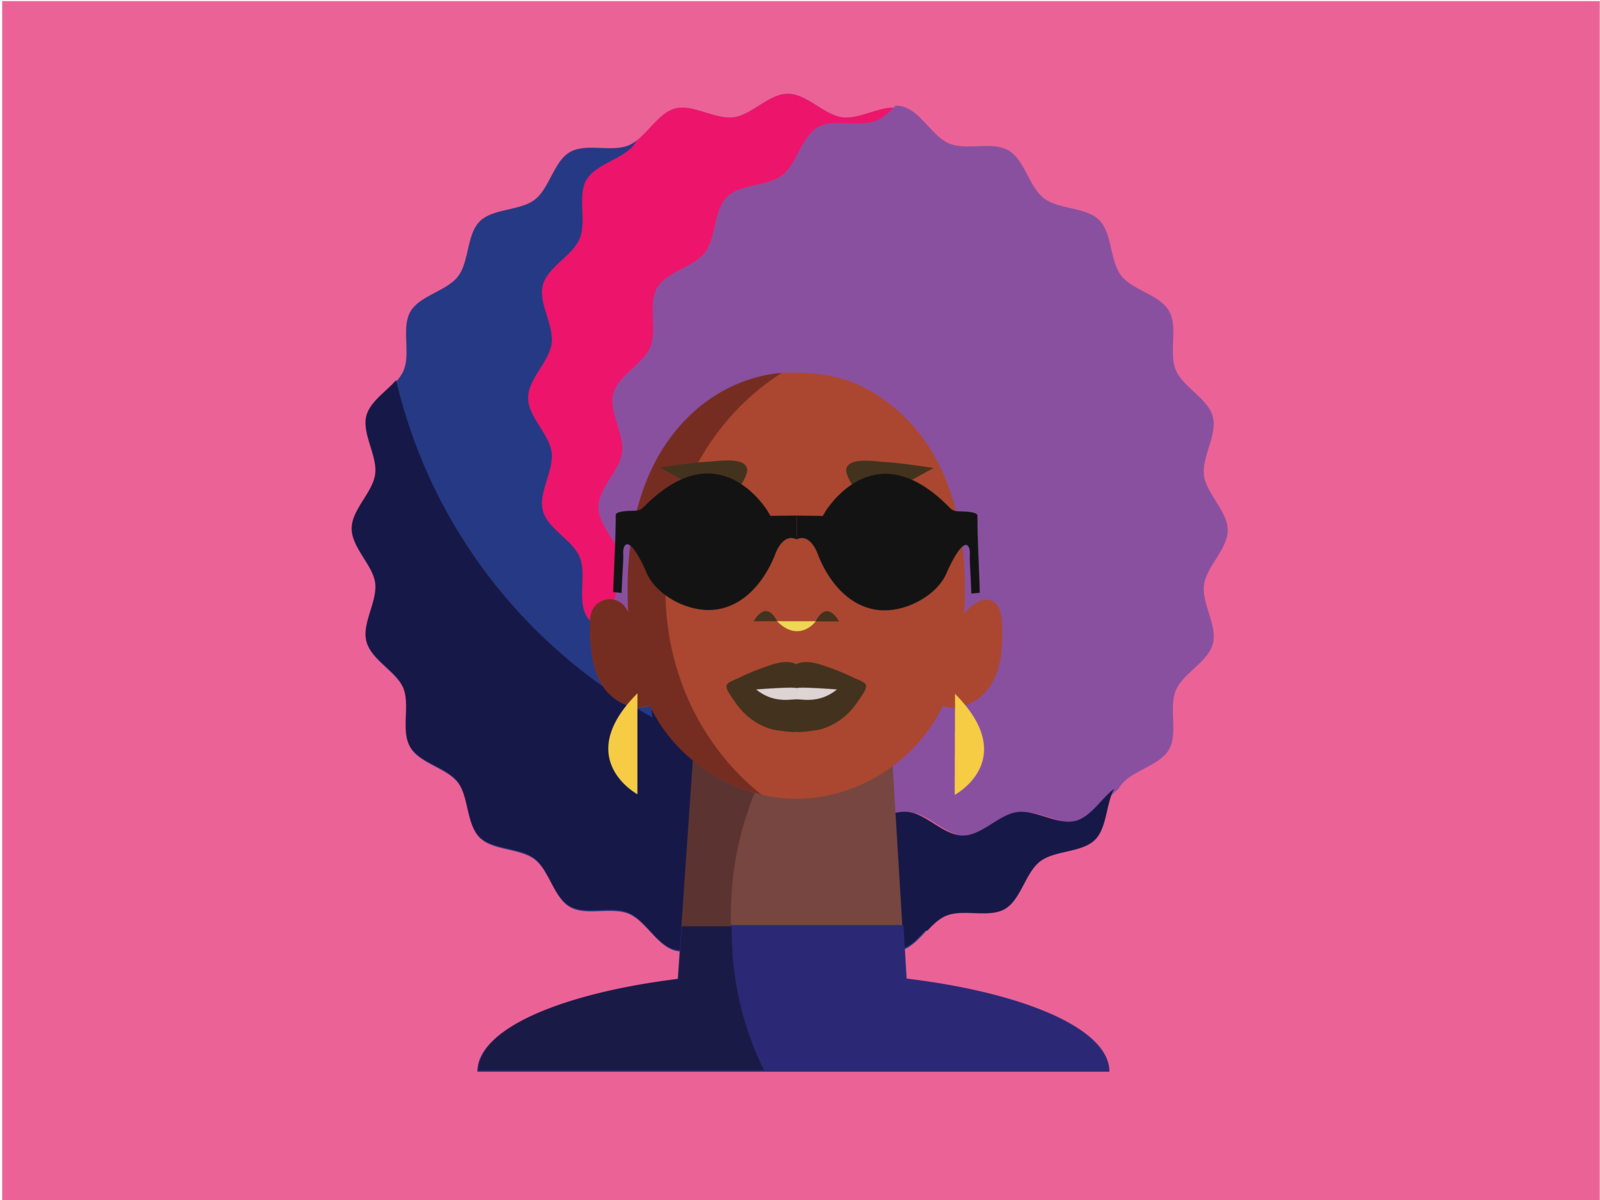 cool lady by Beverly Wang on Dribbble